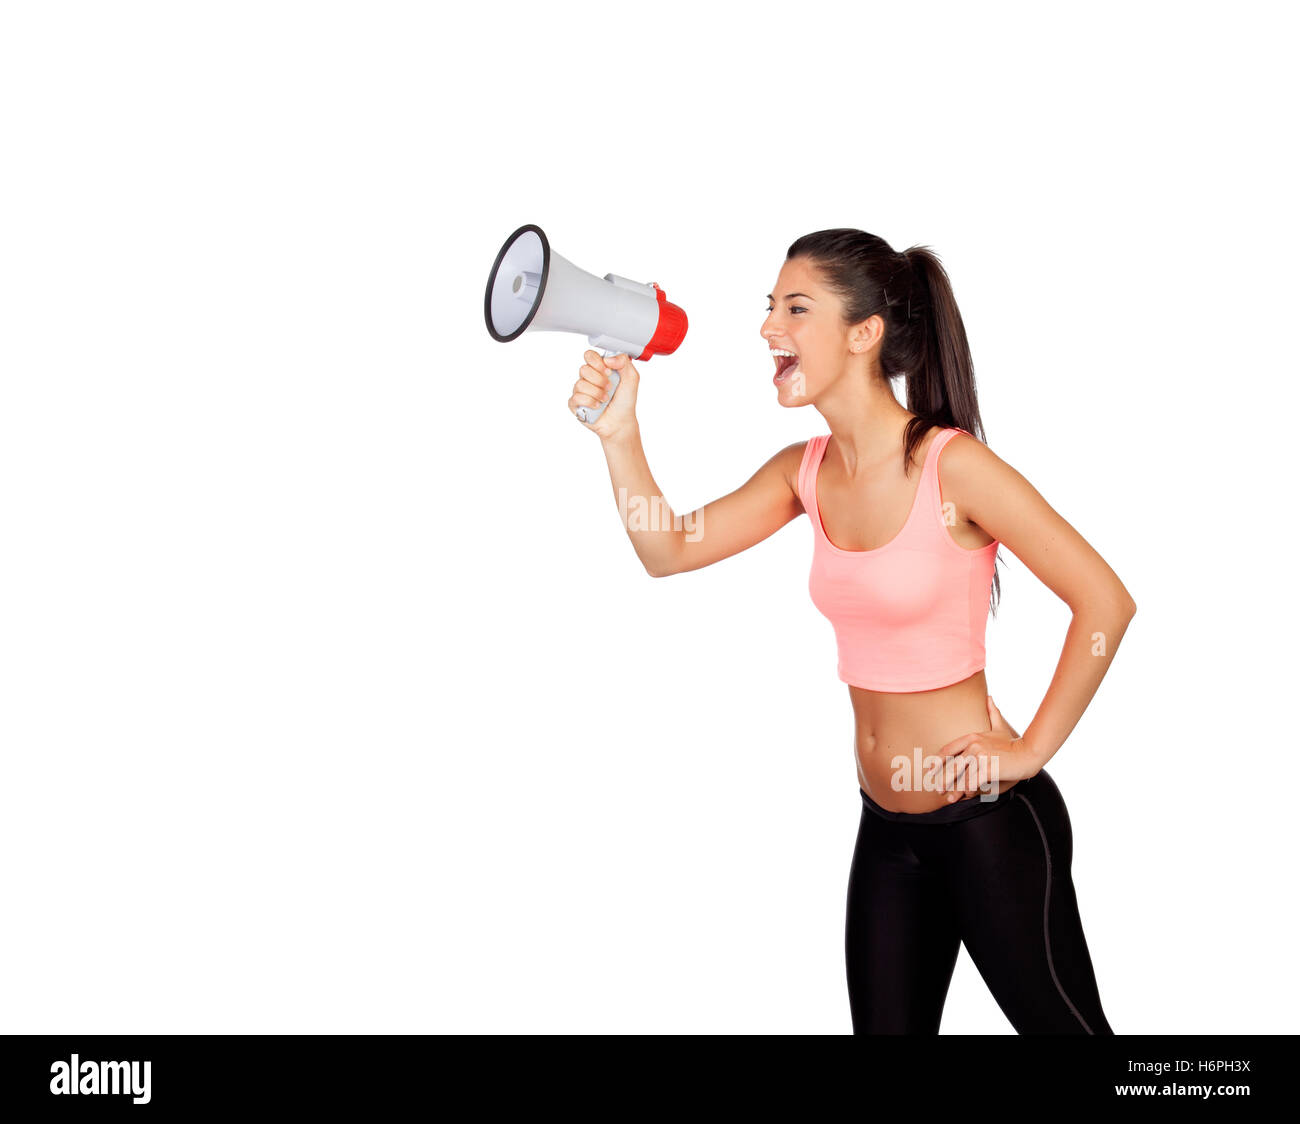 Attractive girl with fitness clothing and megaphone isolated on a white background Stock Photo